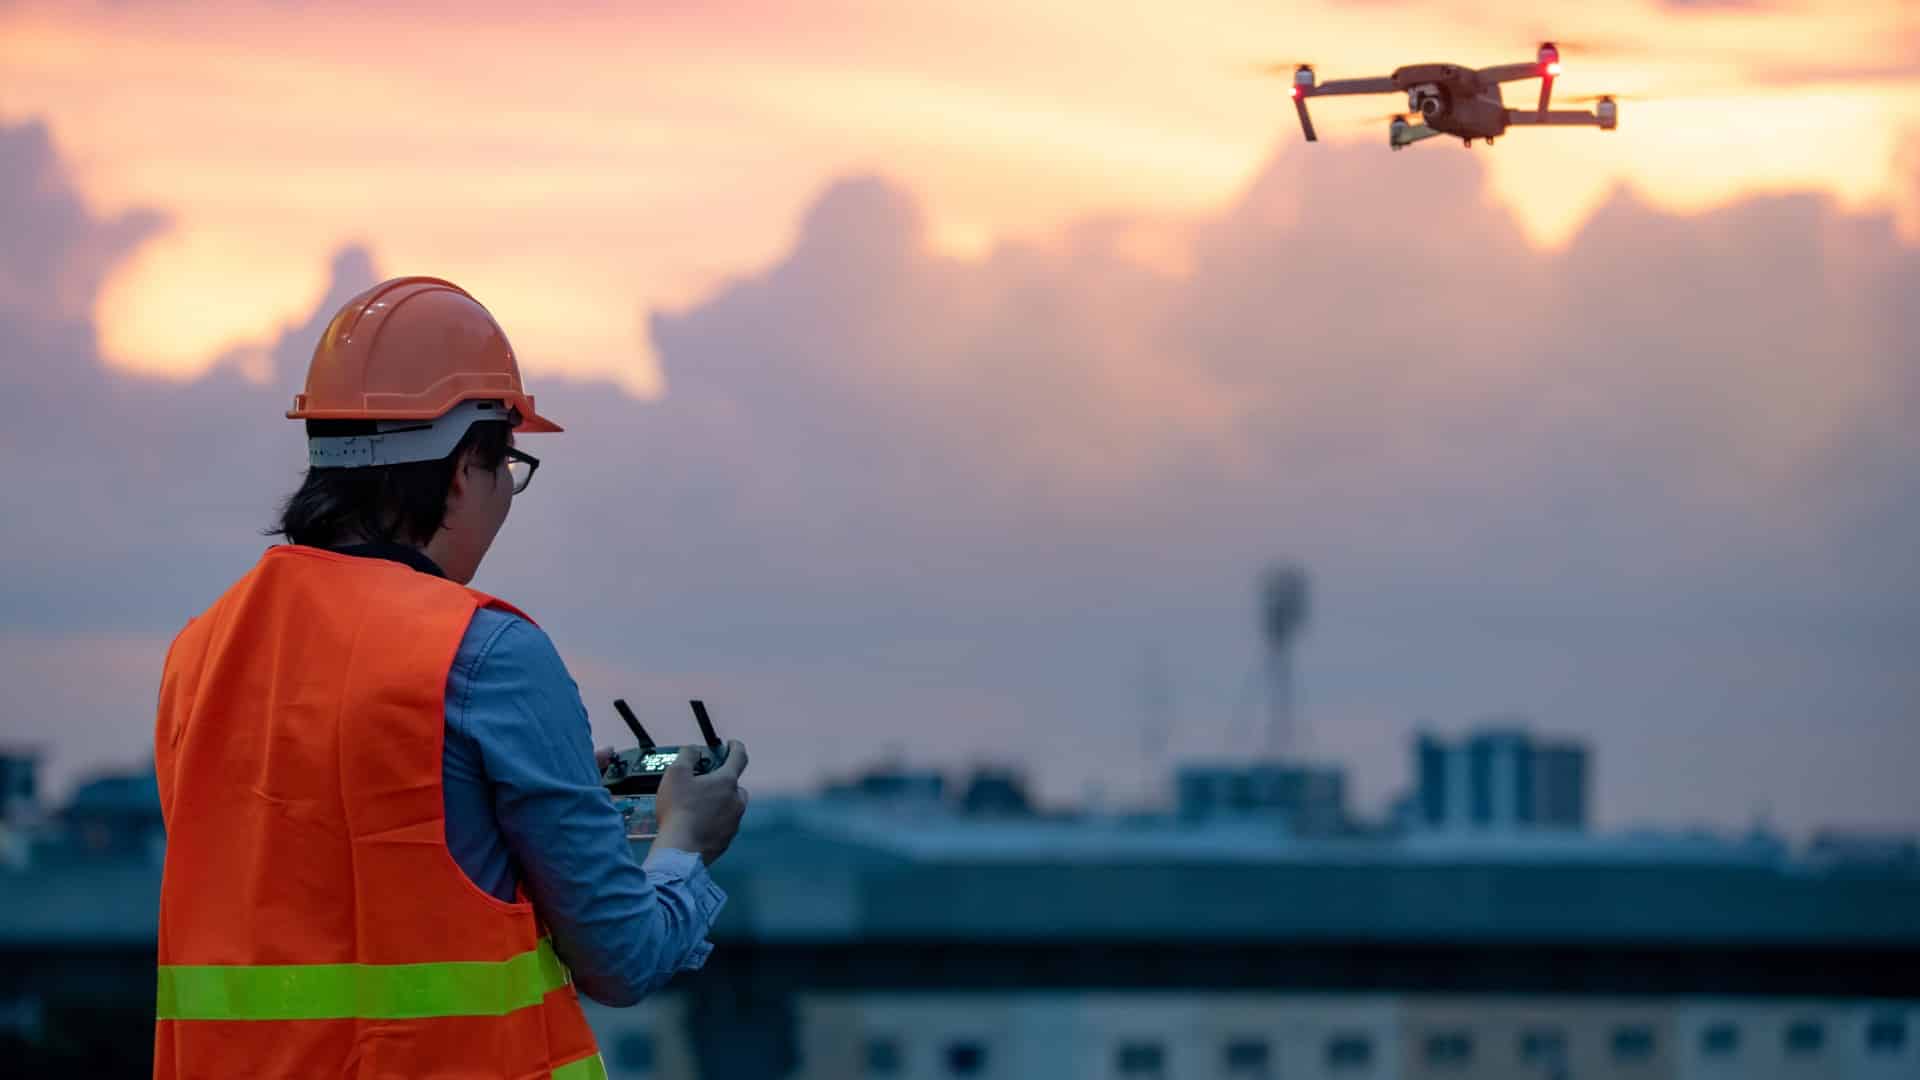 Are you wondering, "Is a Drone a Good Investment for my Business?" This contractor operating a drone at sunset says the answer is yes.